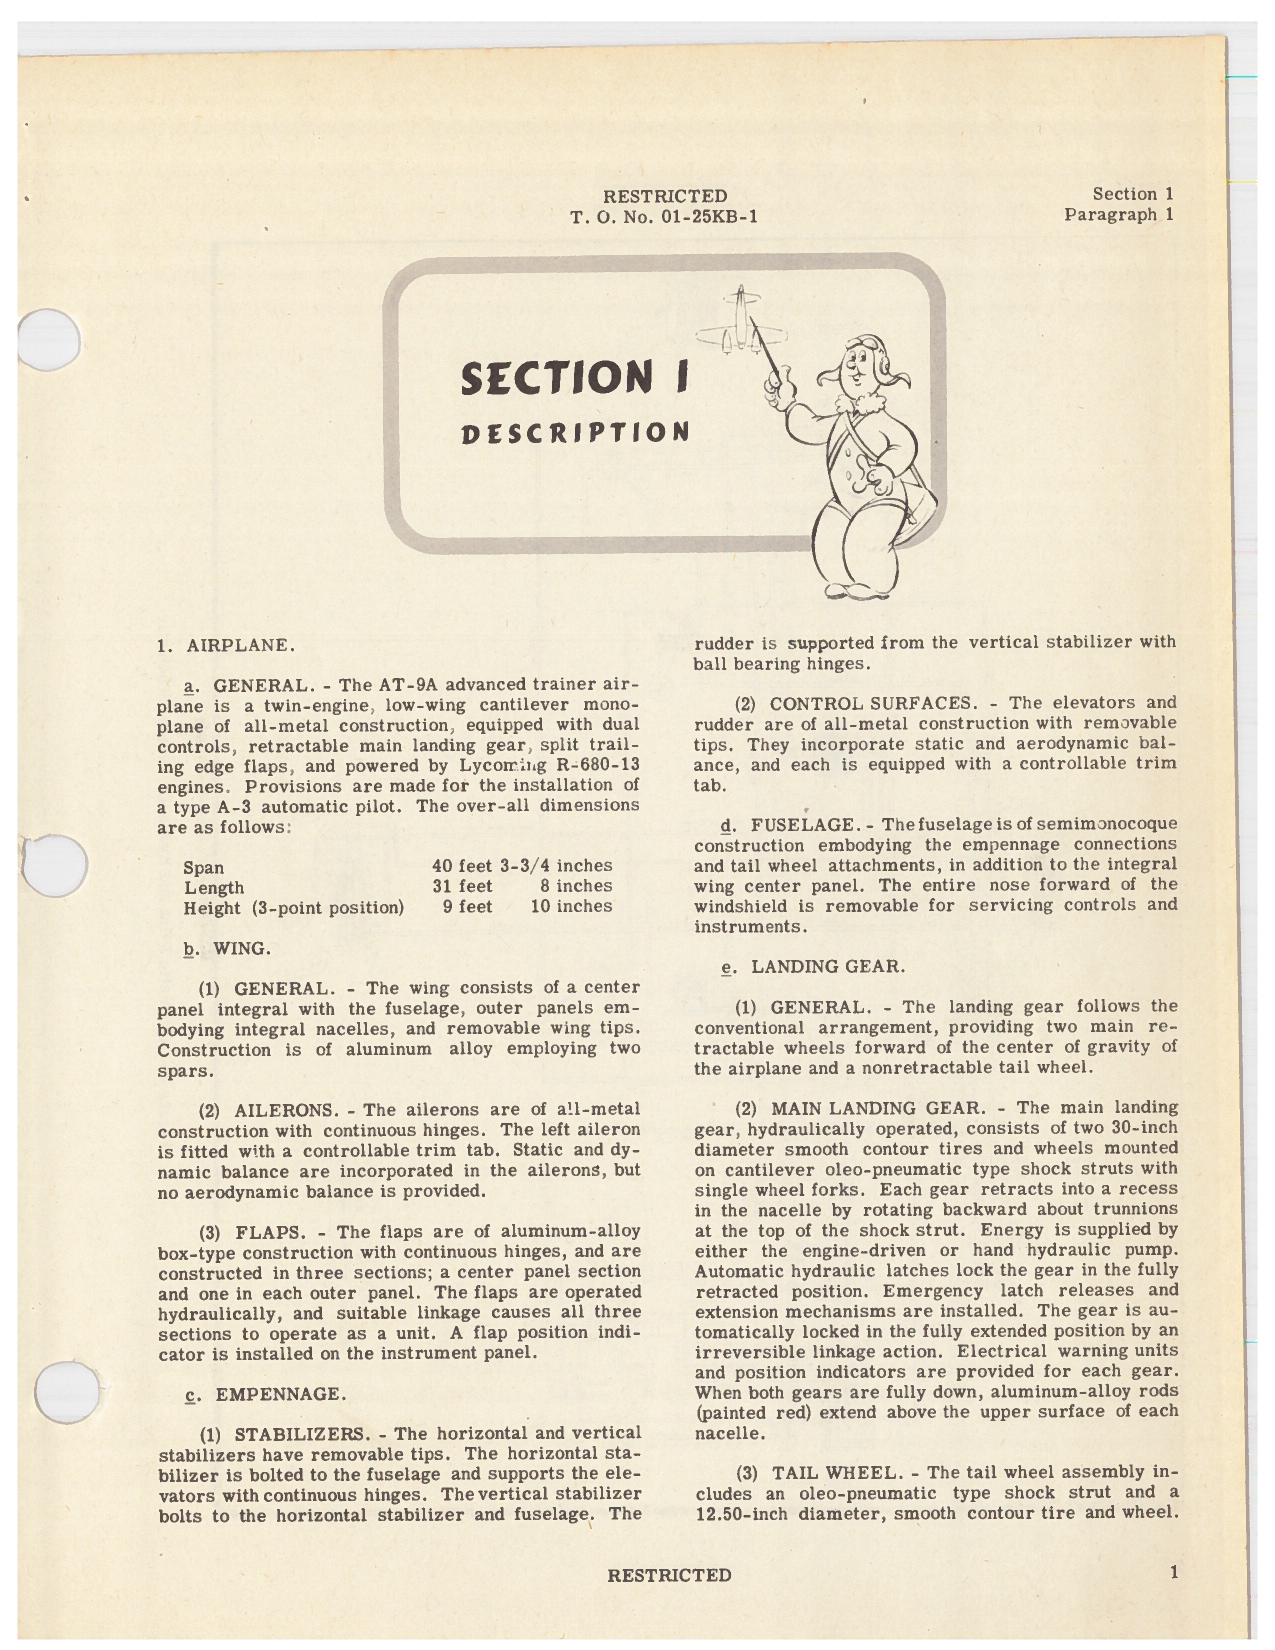 Sample page 7 from AirCorps Library document: Pilot's Flight Operating Instructions for Army Model AT-9A Airplane